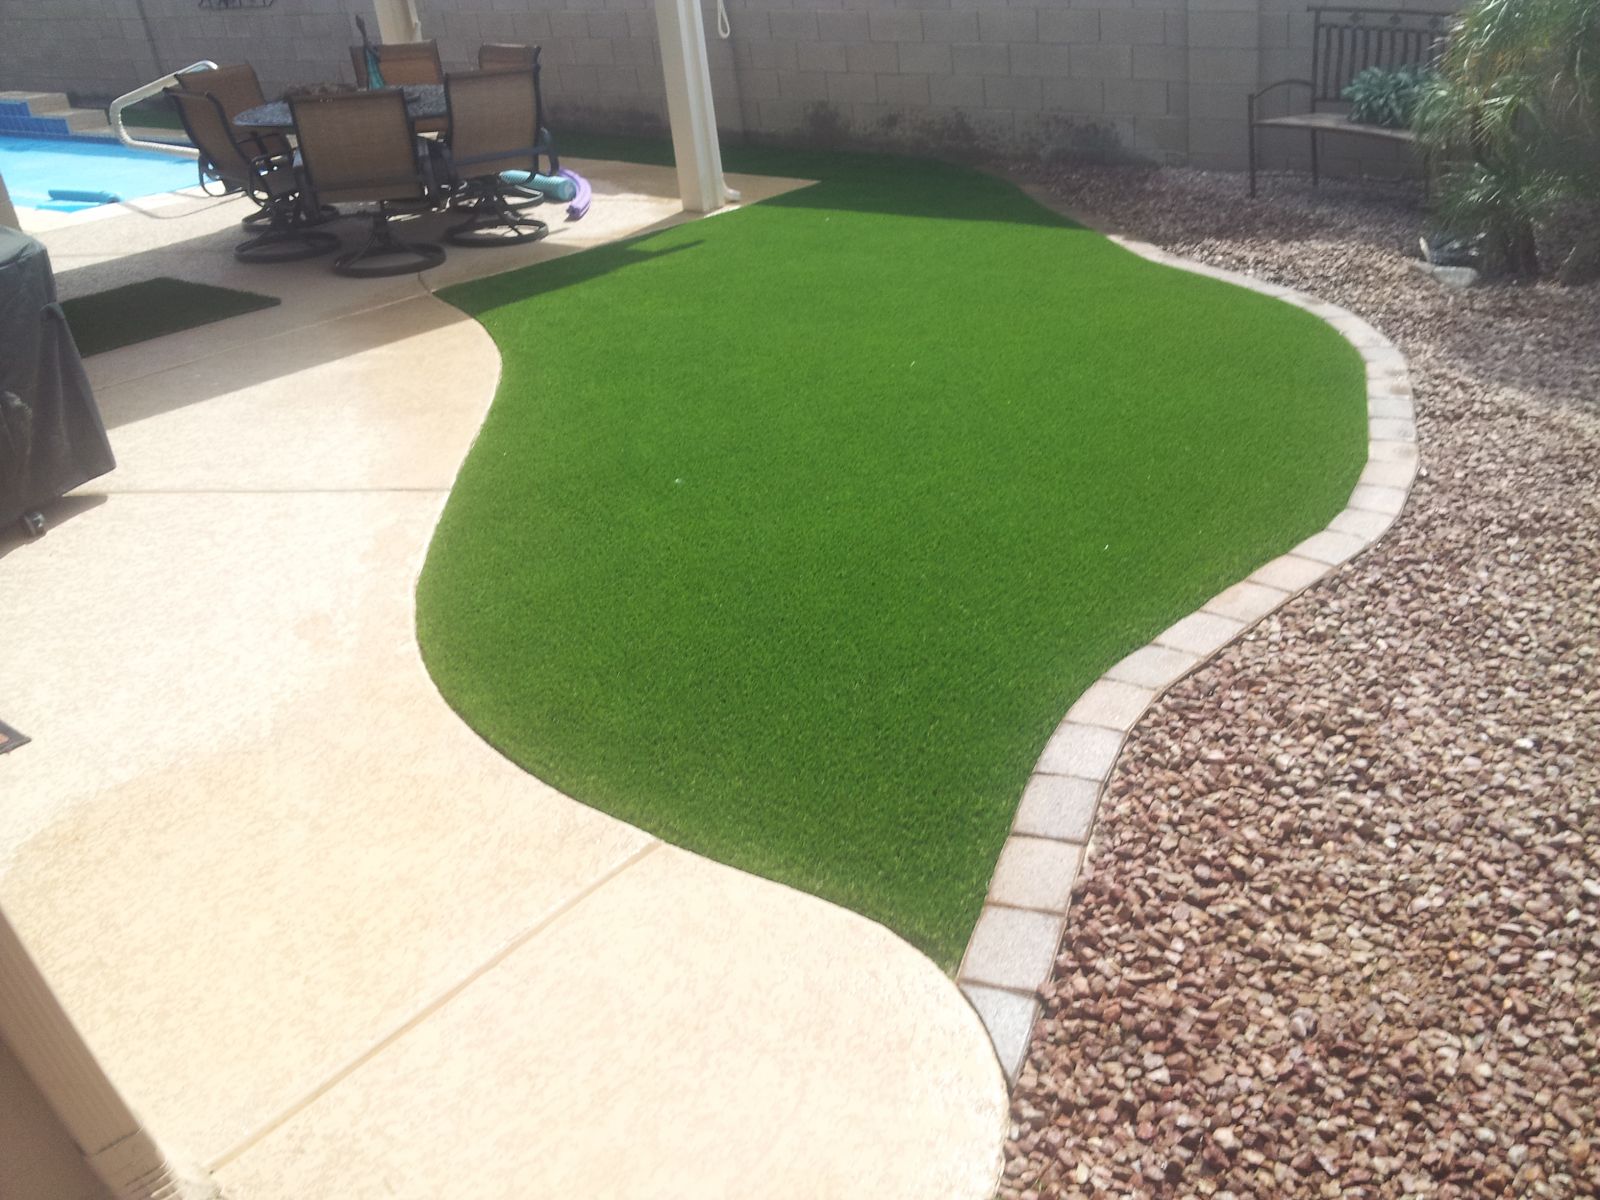 Luxury of a Perfect Lawn with Luxury Turf Artificial Grass